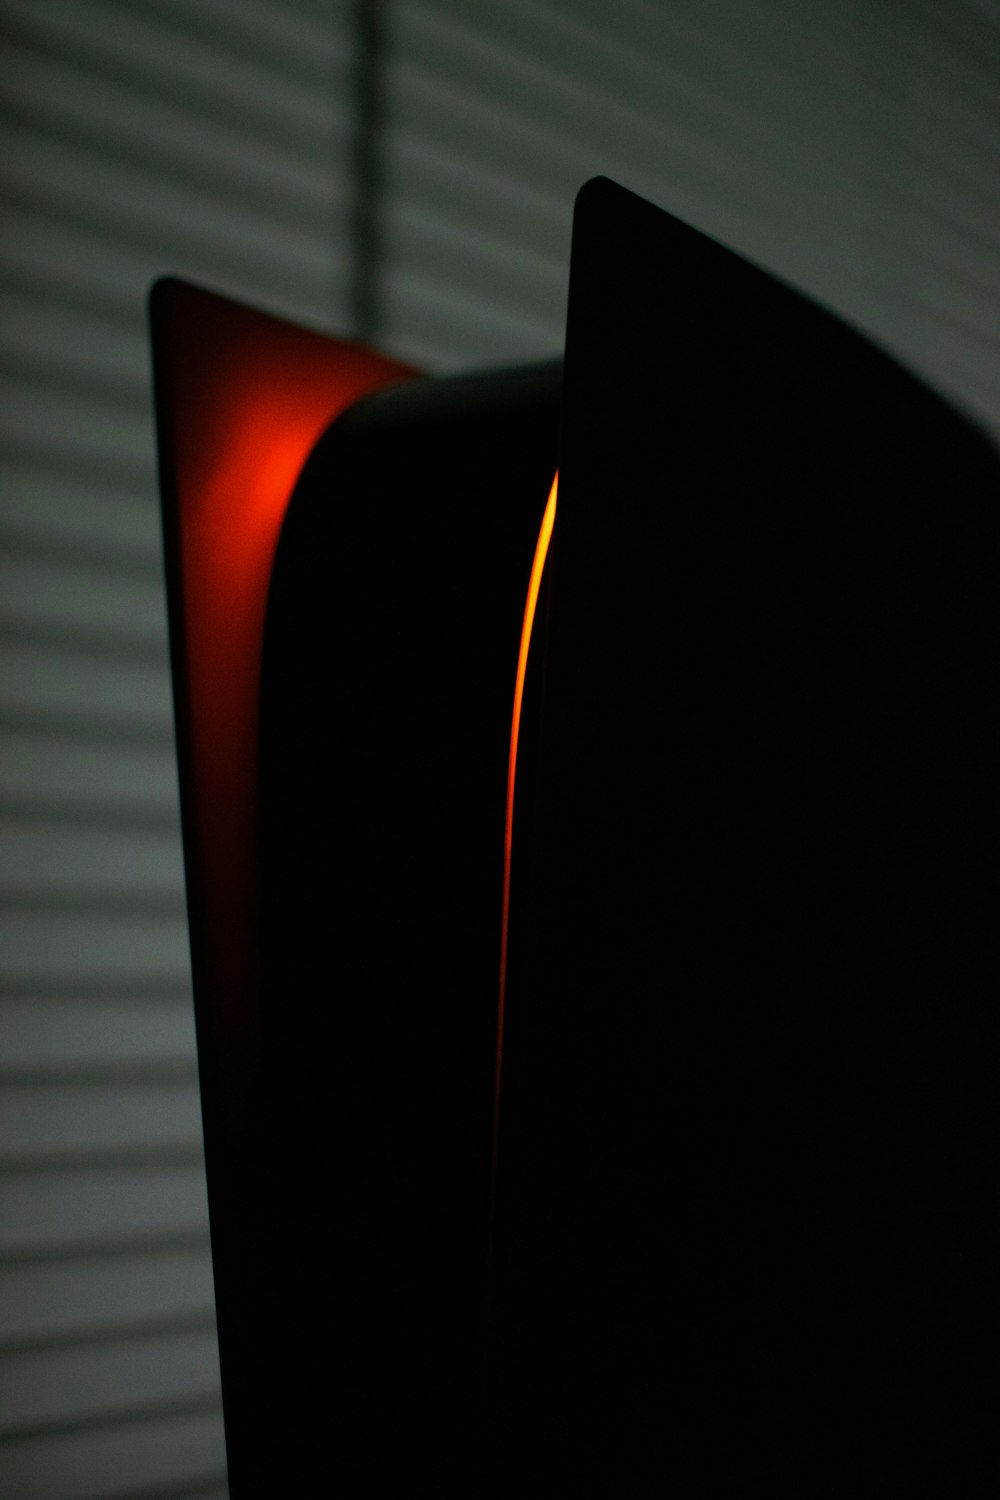 a close up of a traffic light in a dark room